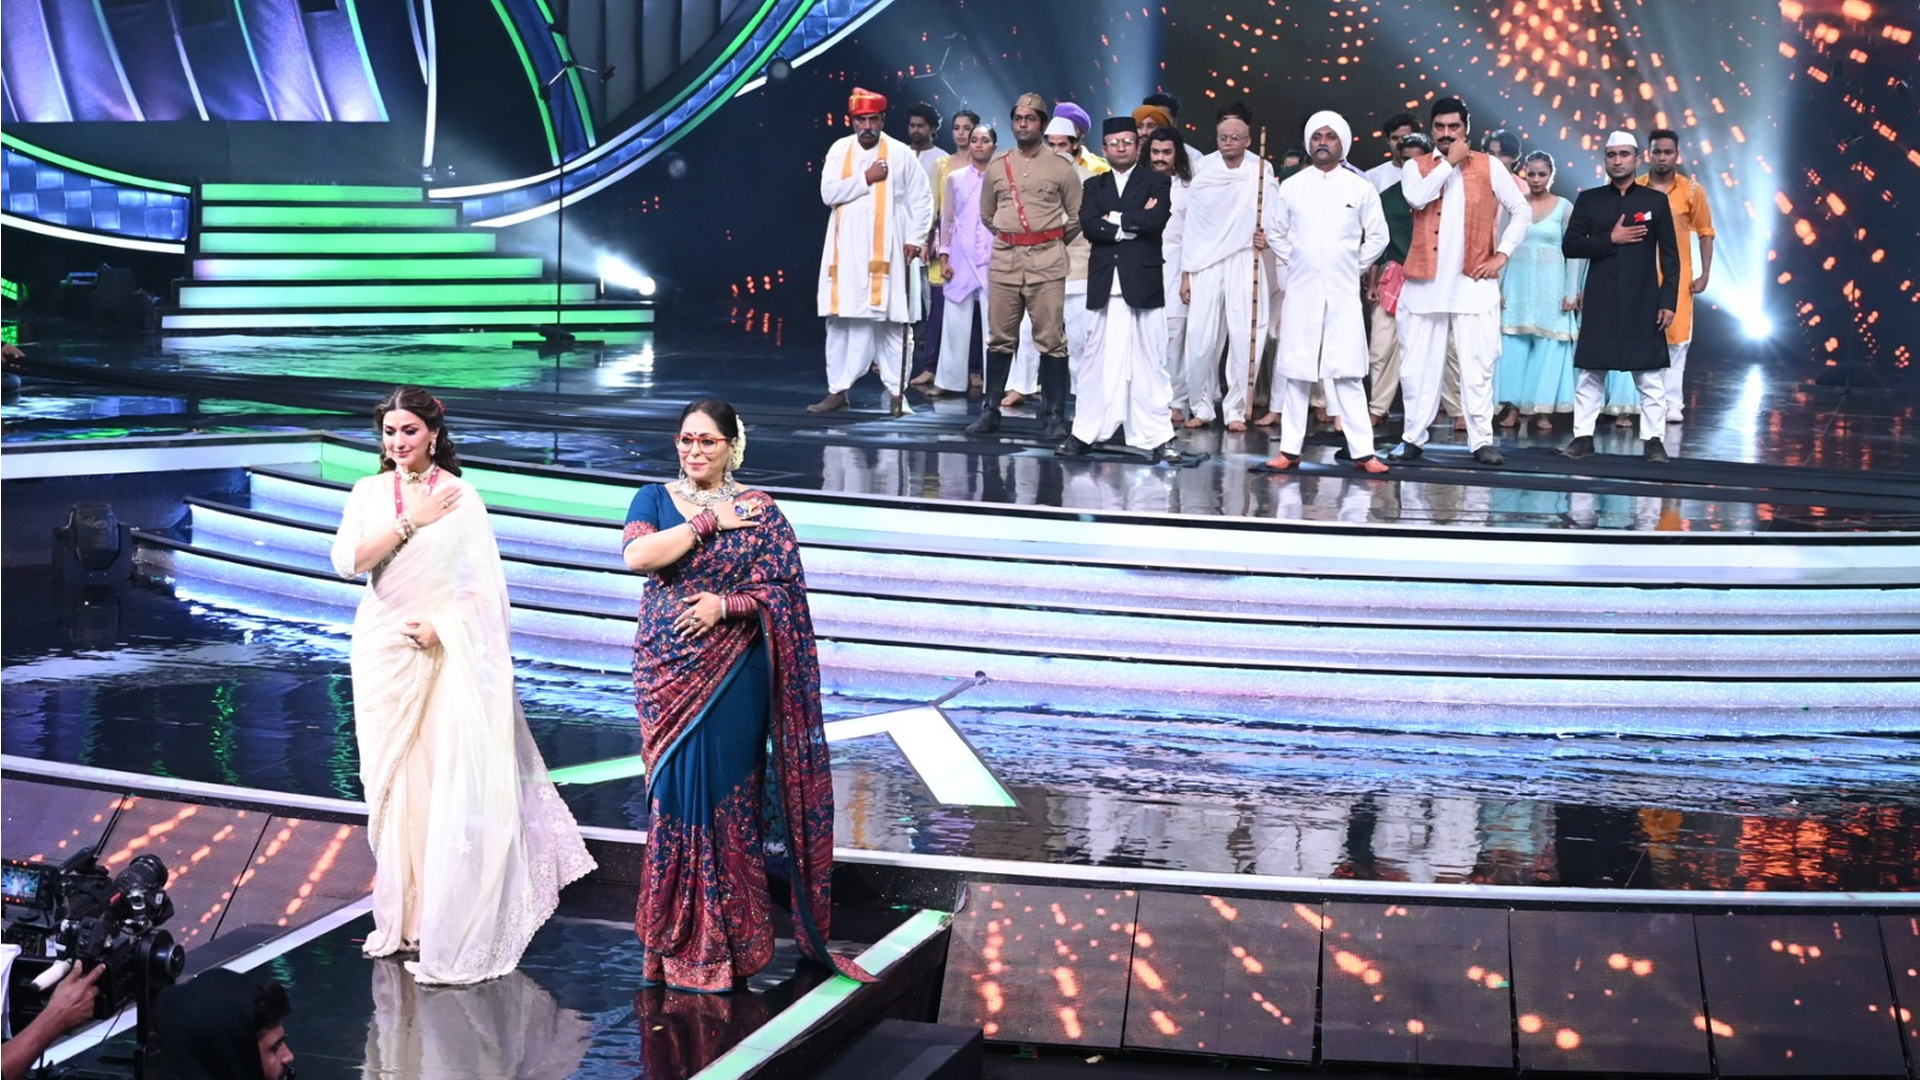 Sony Entertainment Television’s India’s Best Dancer 3, is set to commemorate the 76th anniversary of Indian Independence with its upcoming ‘Azaadi Ki Kahani’ special